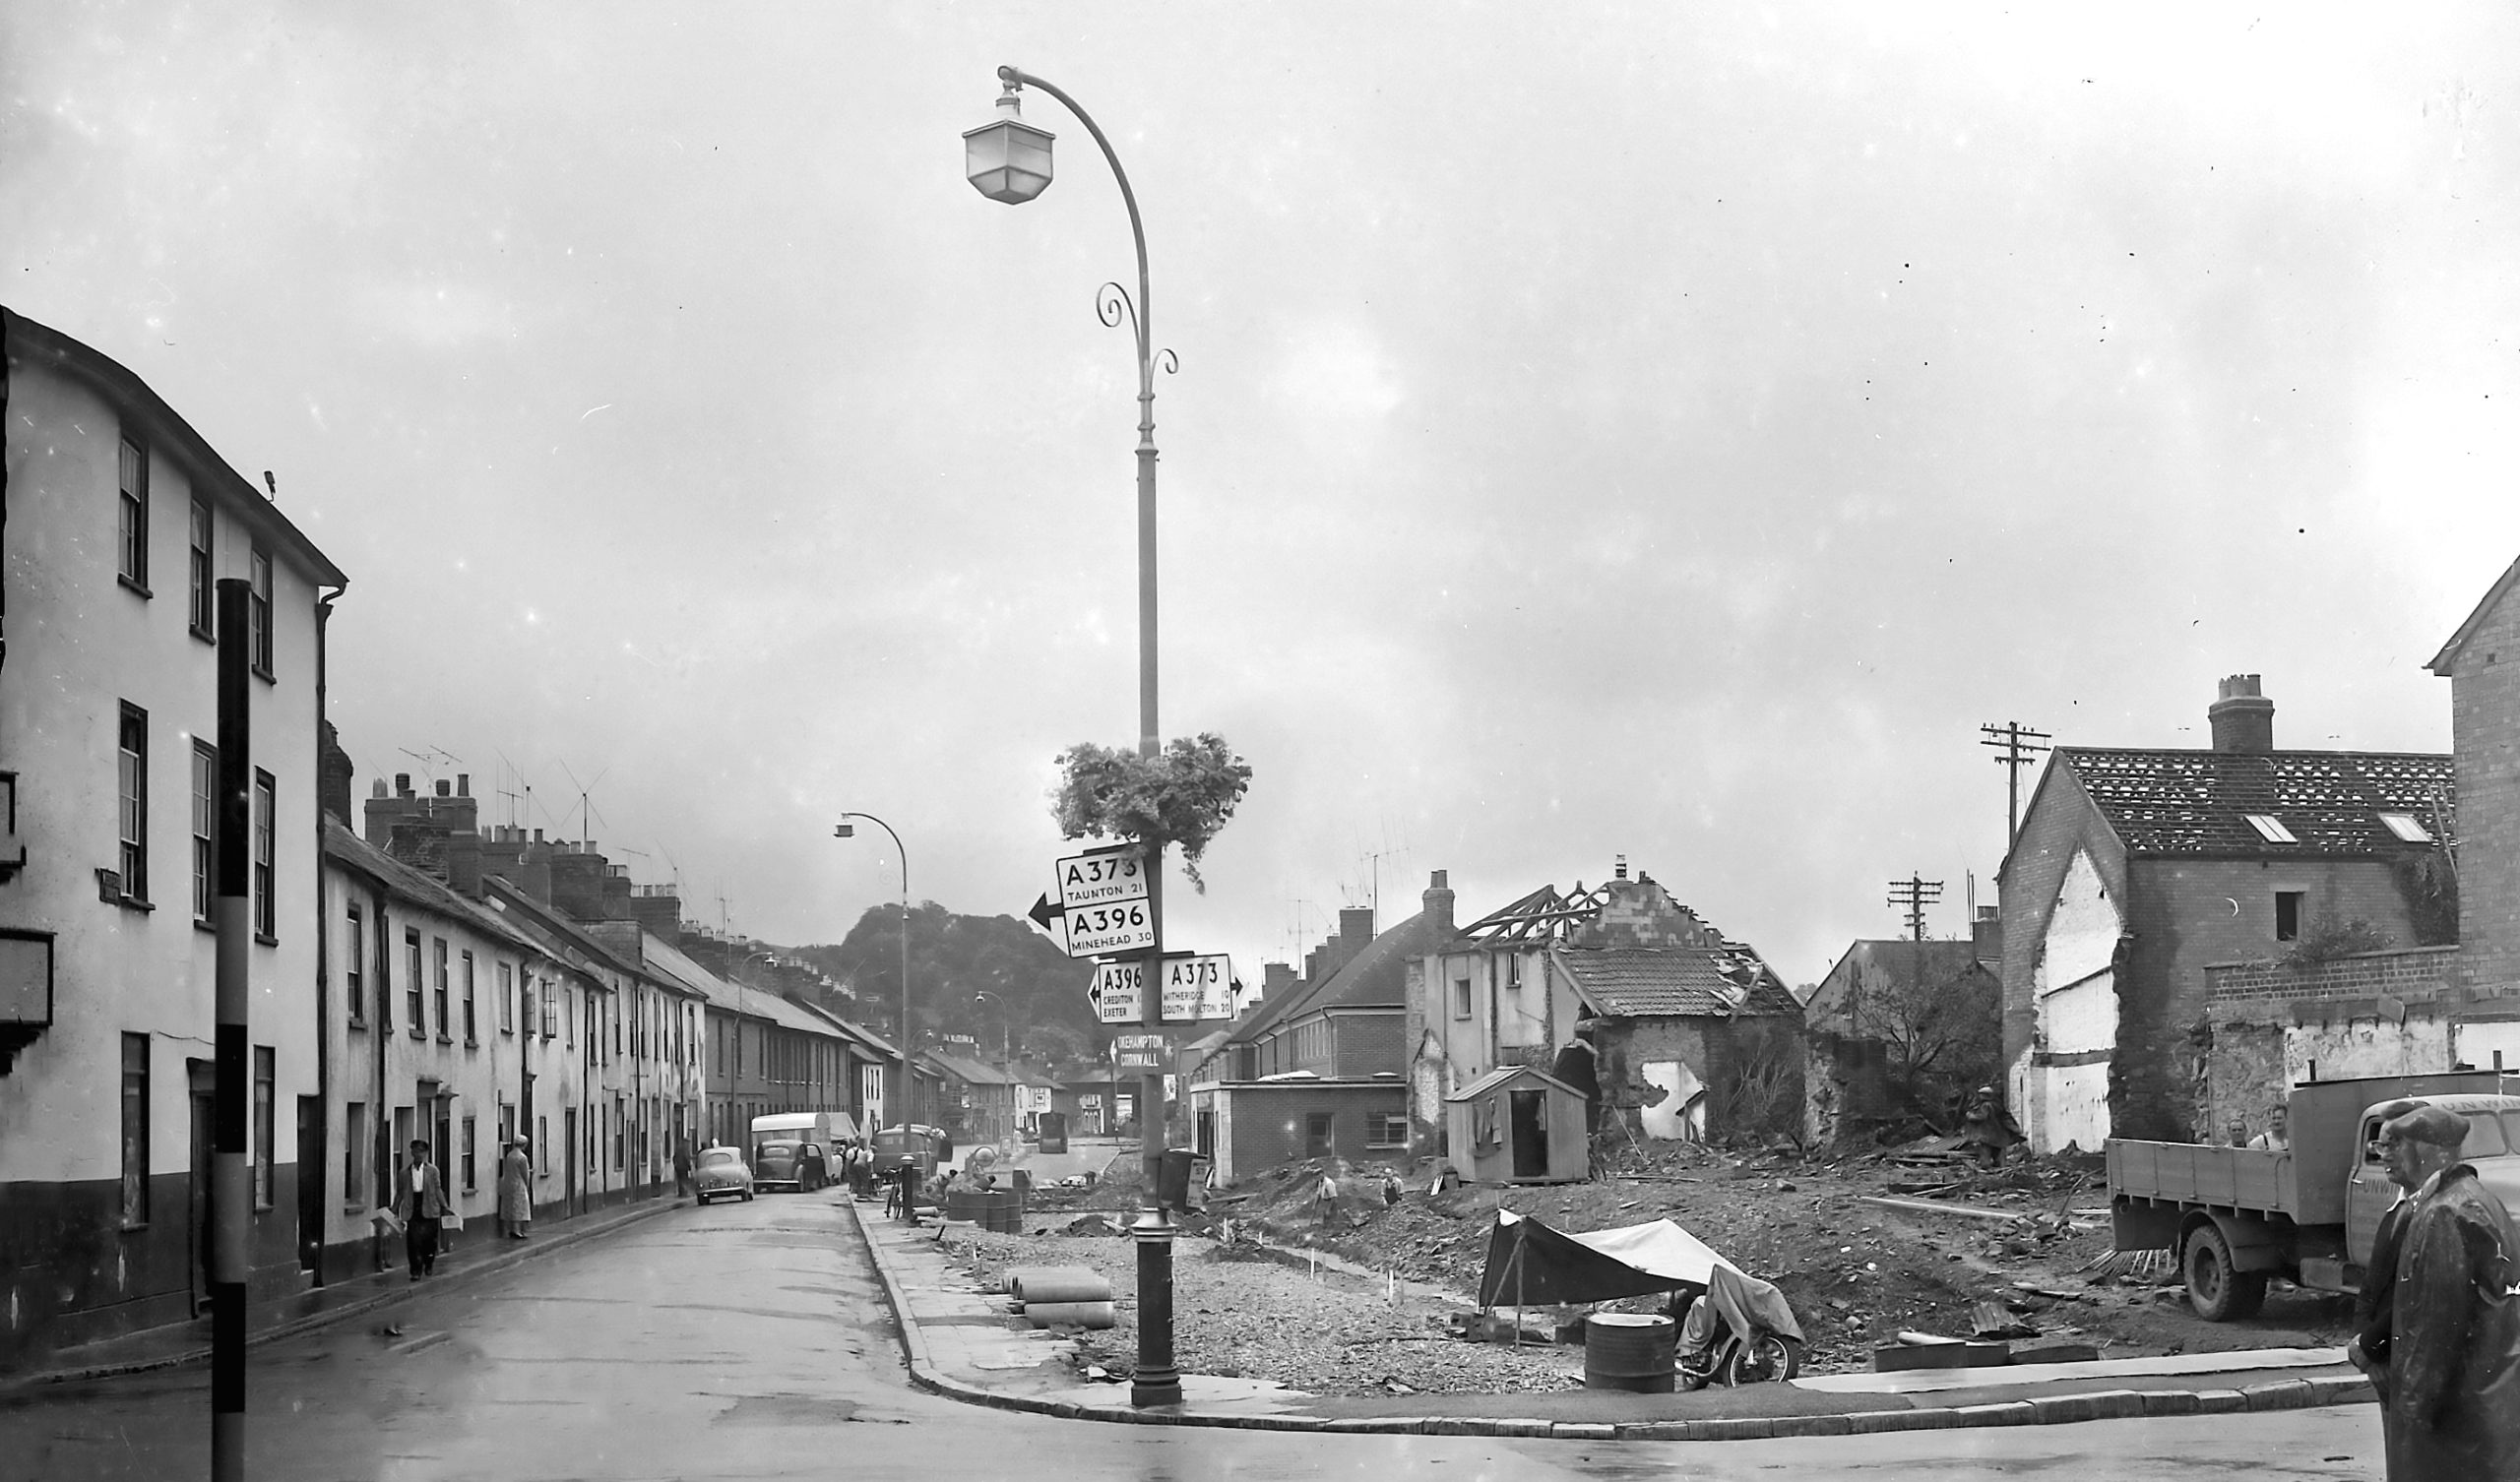 Black and white photo showing a street scene with some demolished houses next to a road.